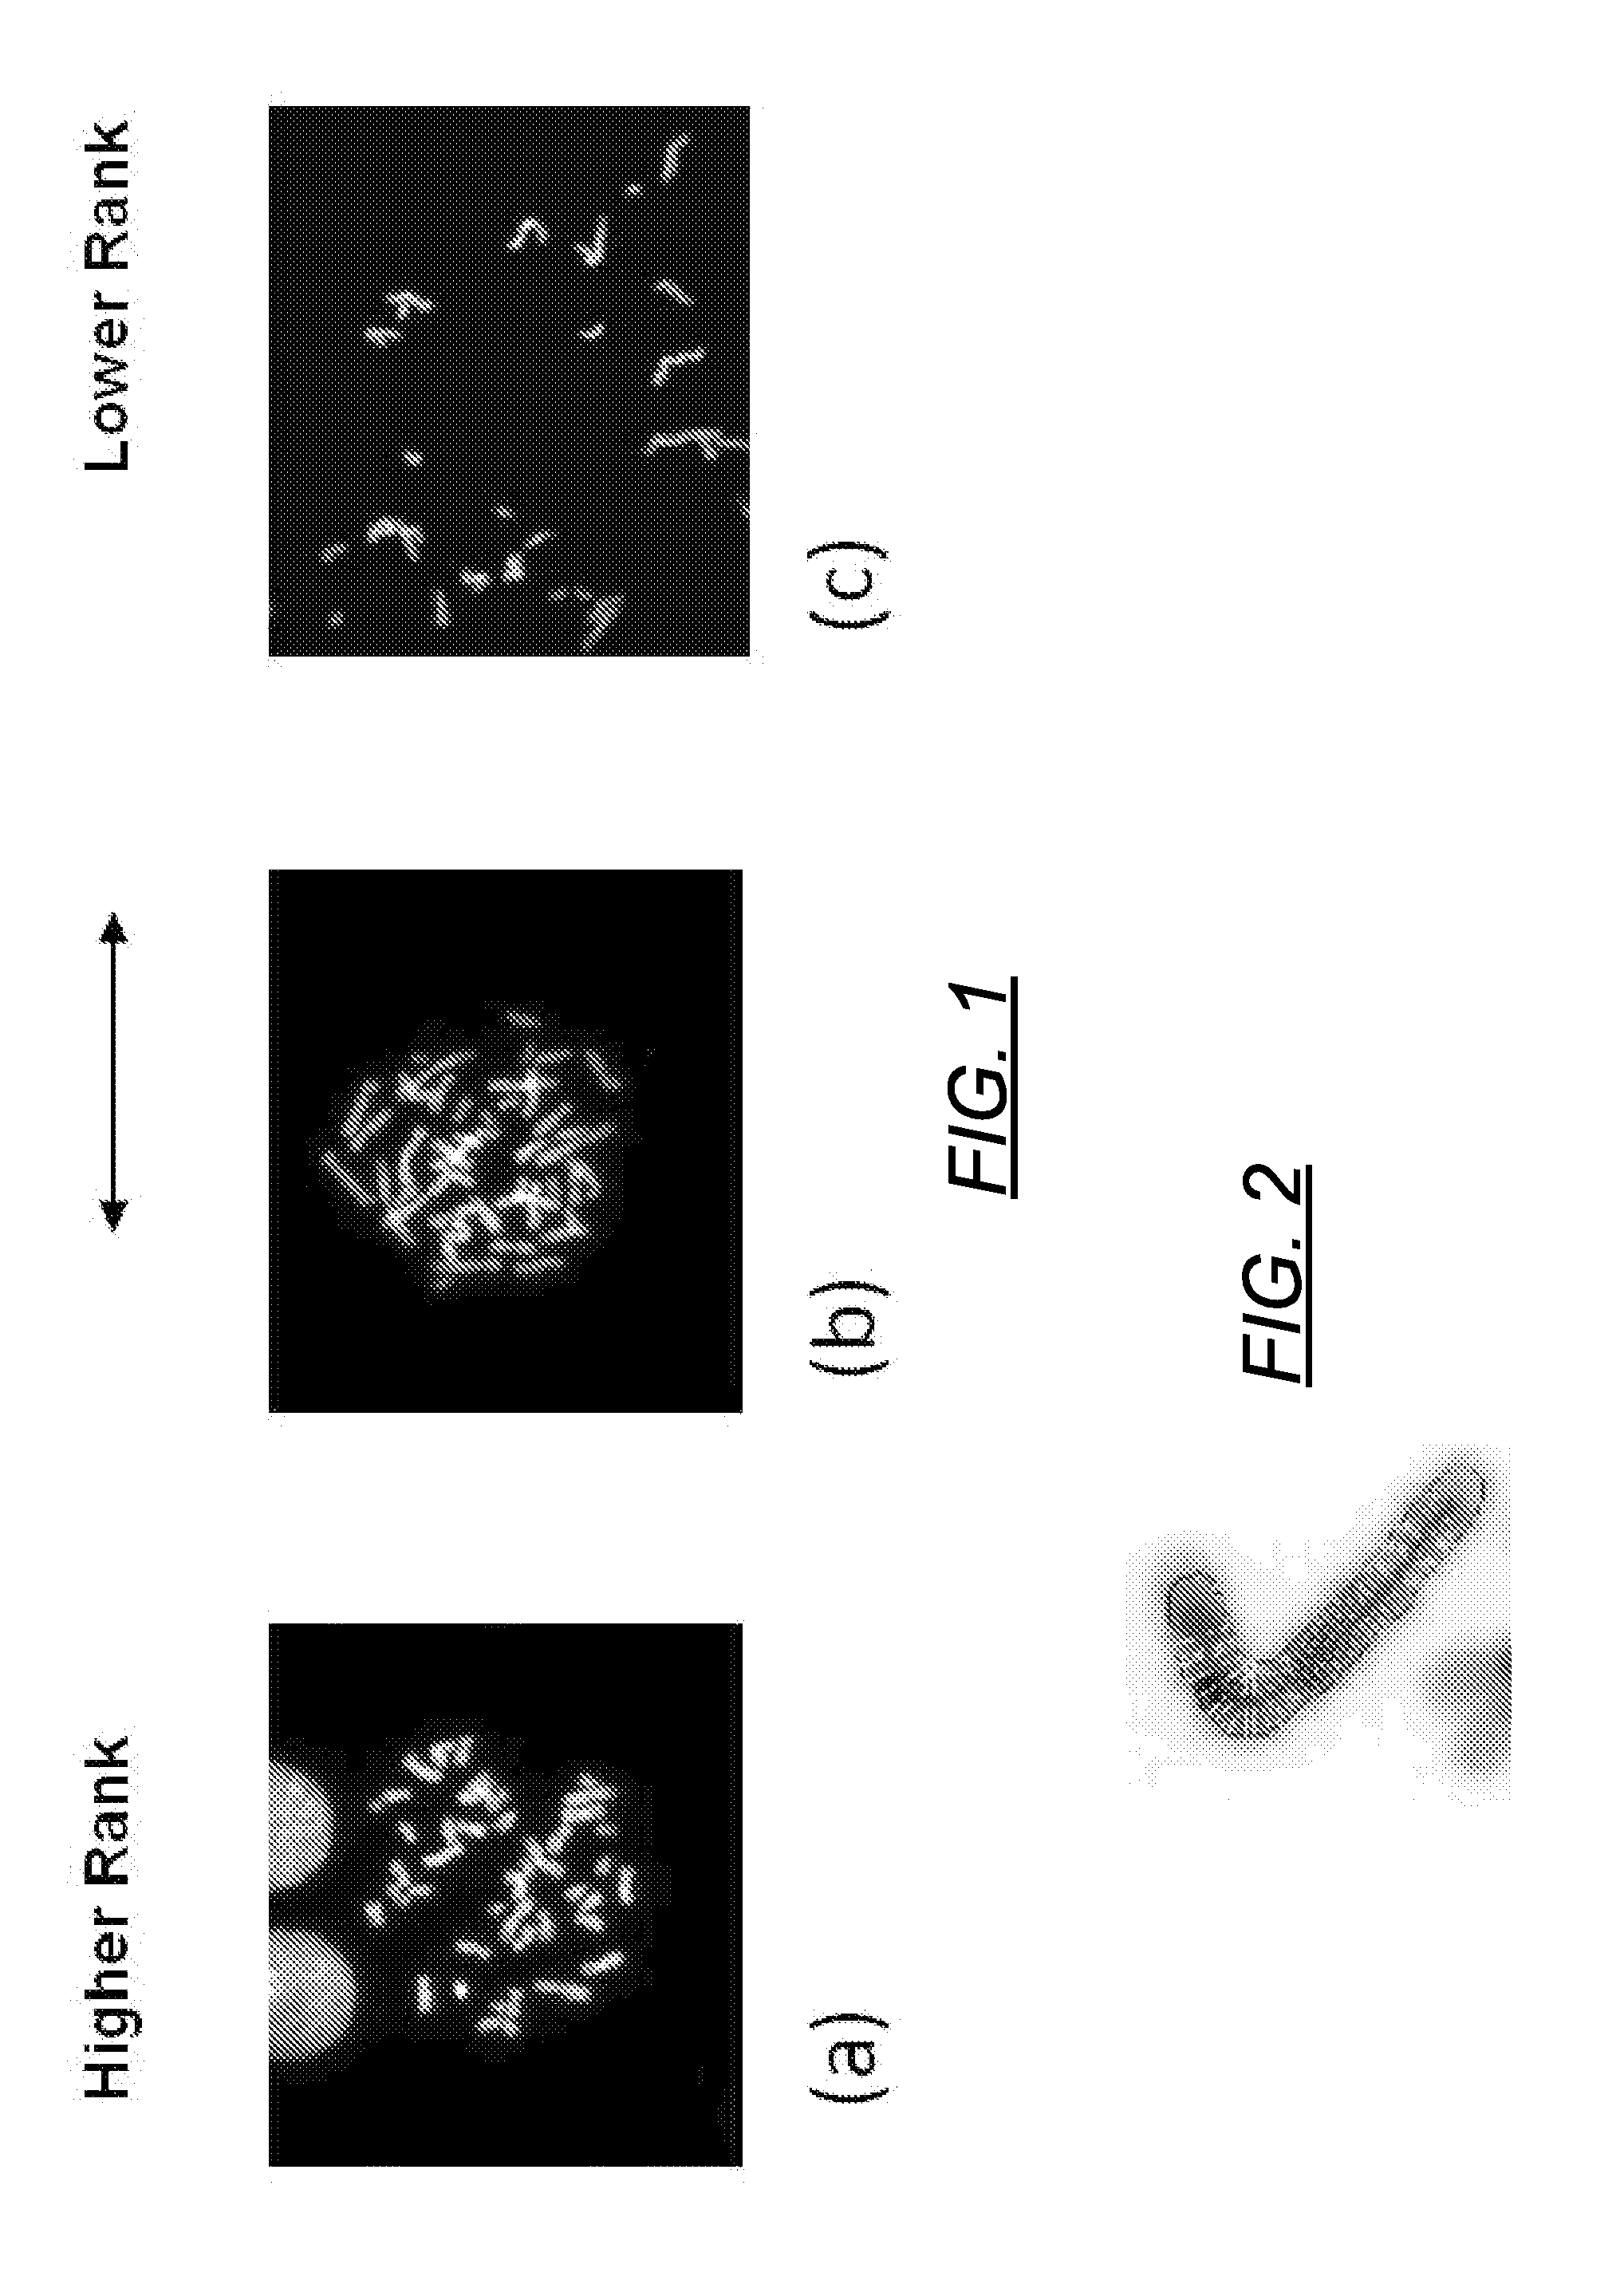 Centromere detector and method for determining radiation exposure from chromosome abnormalities